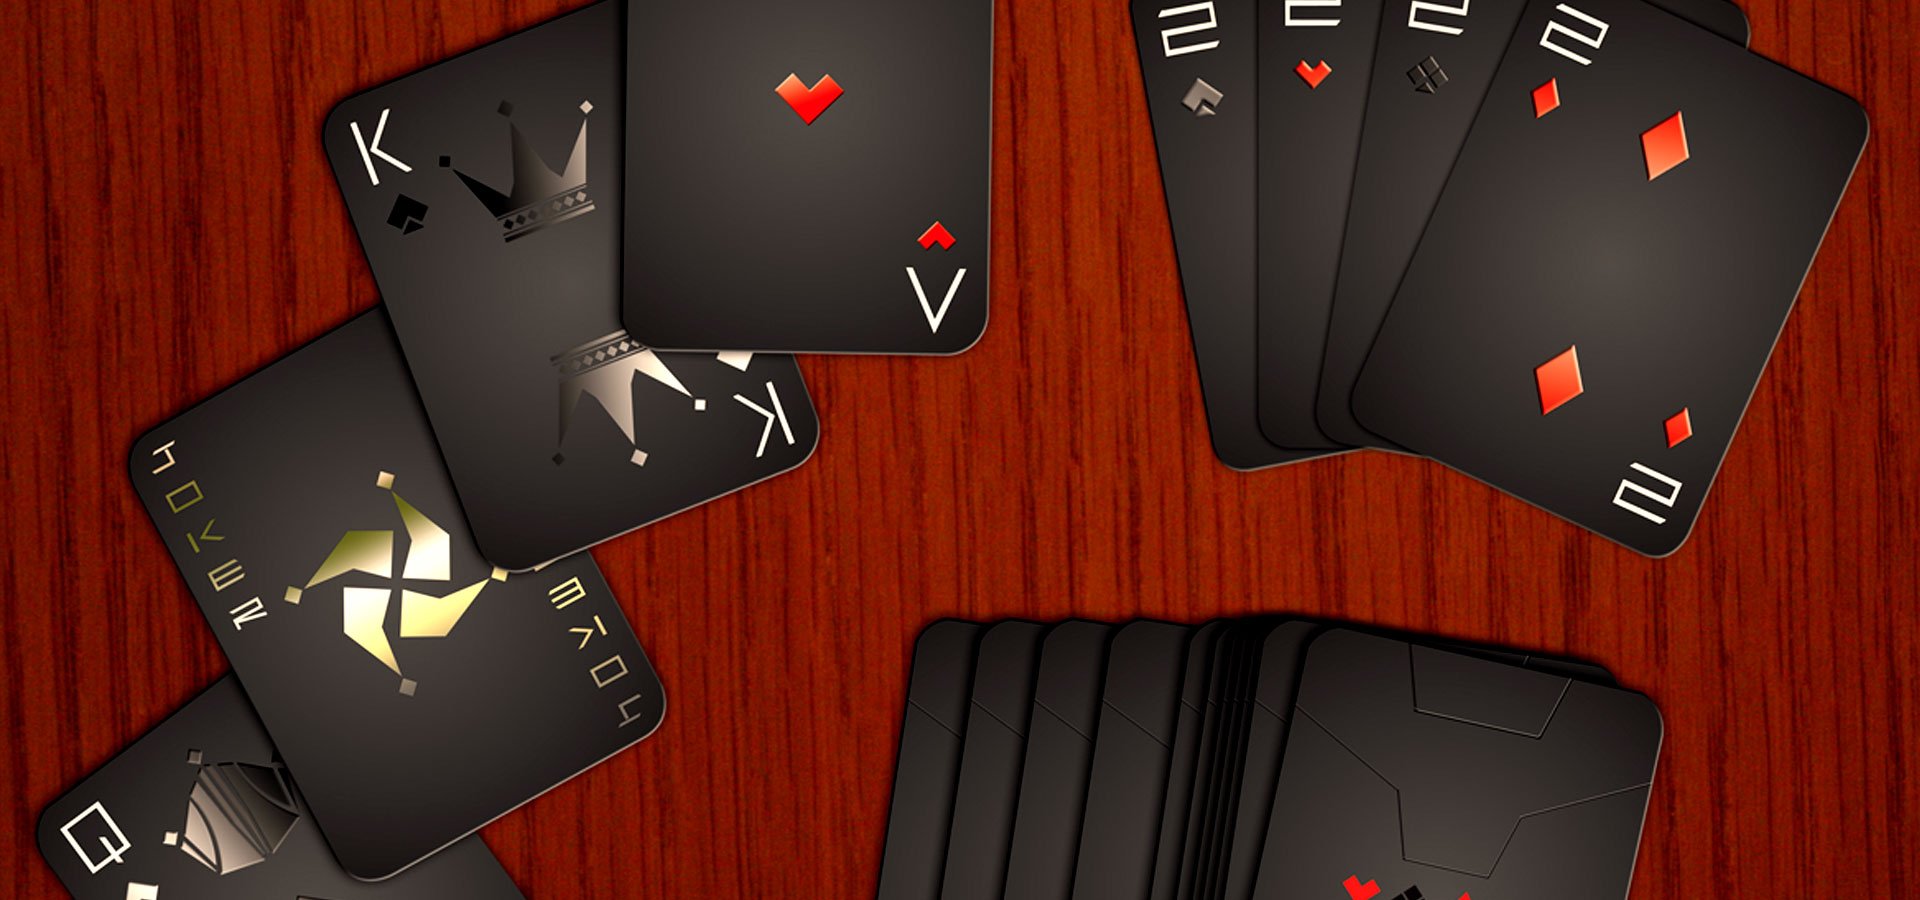 20+ Playing Card Designs  Free & Premium Templates Inside Playing Card Template Illustrator